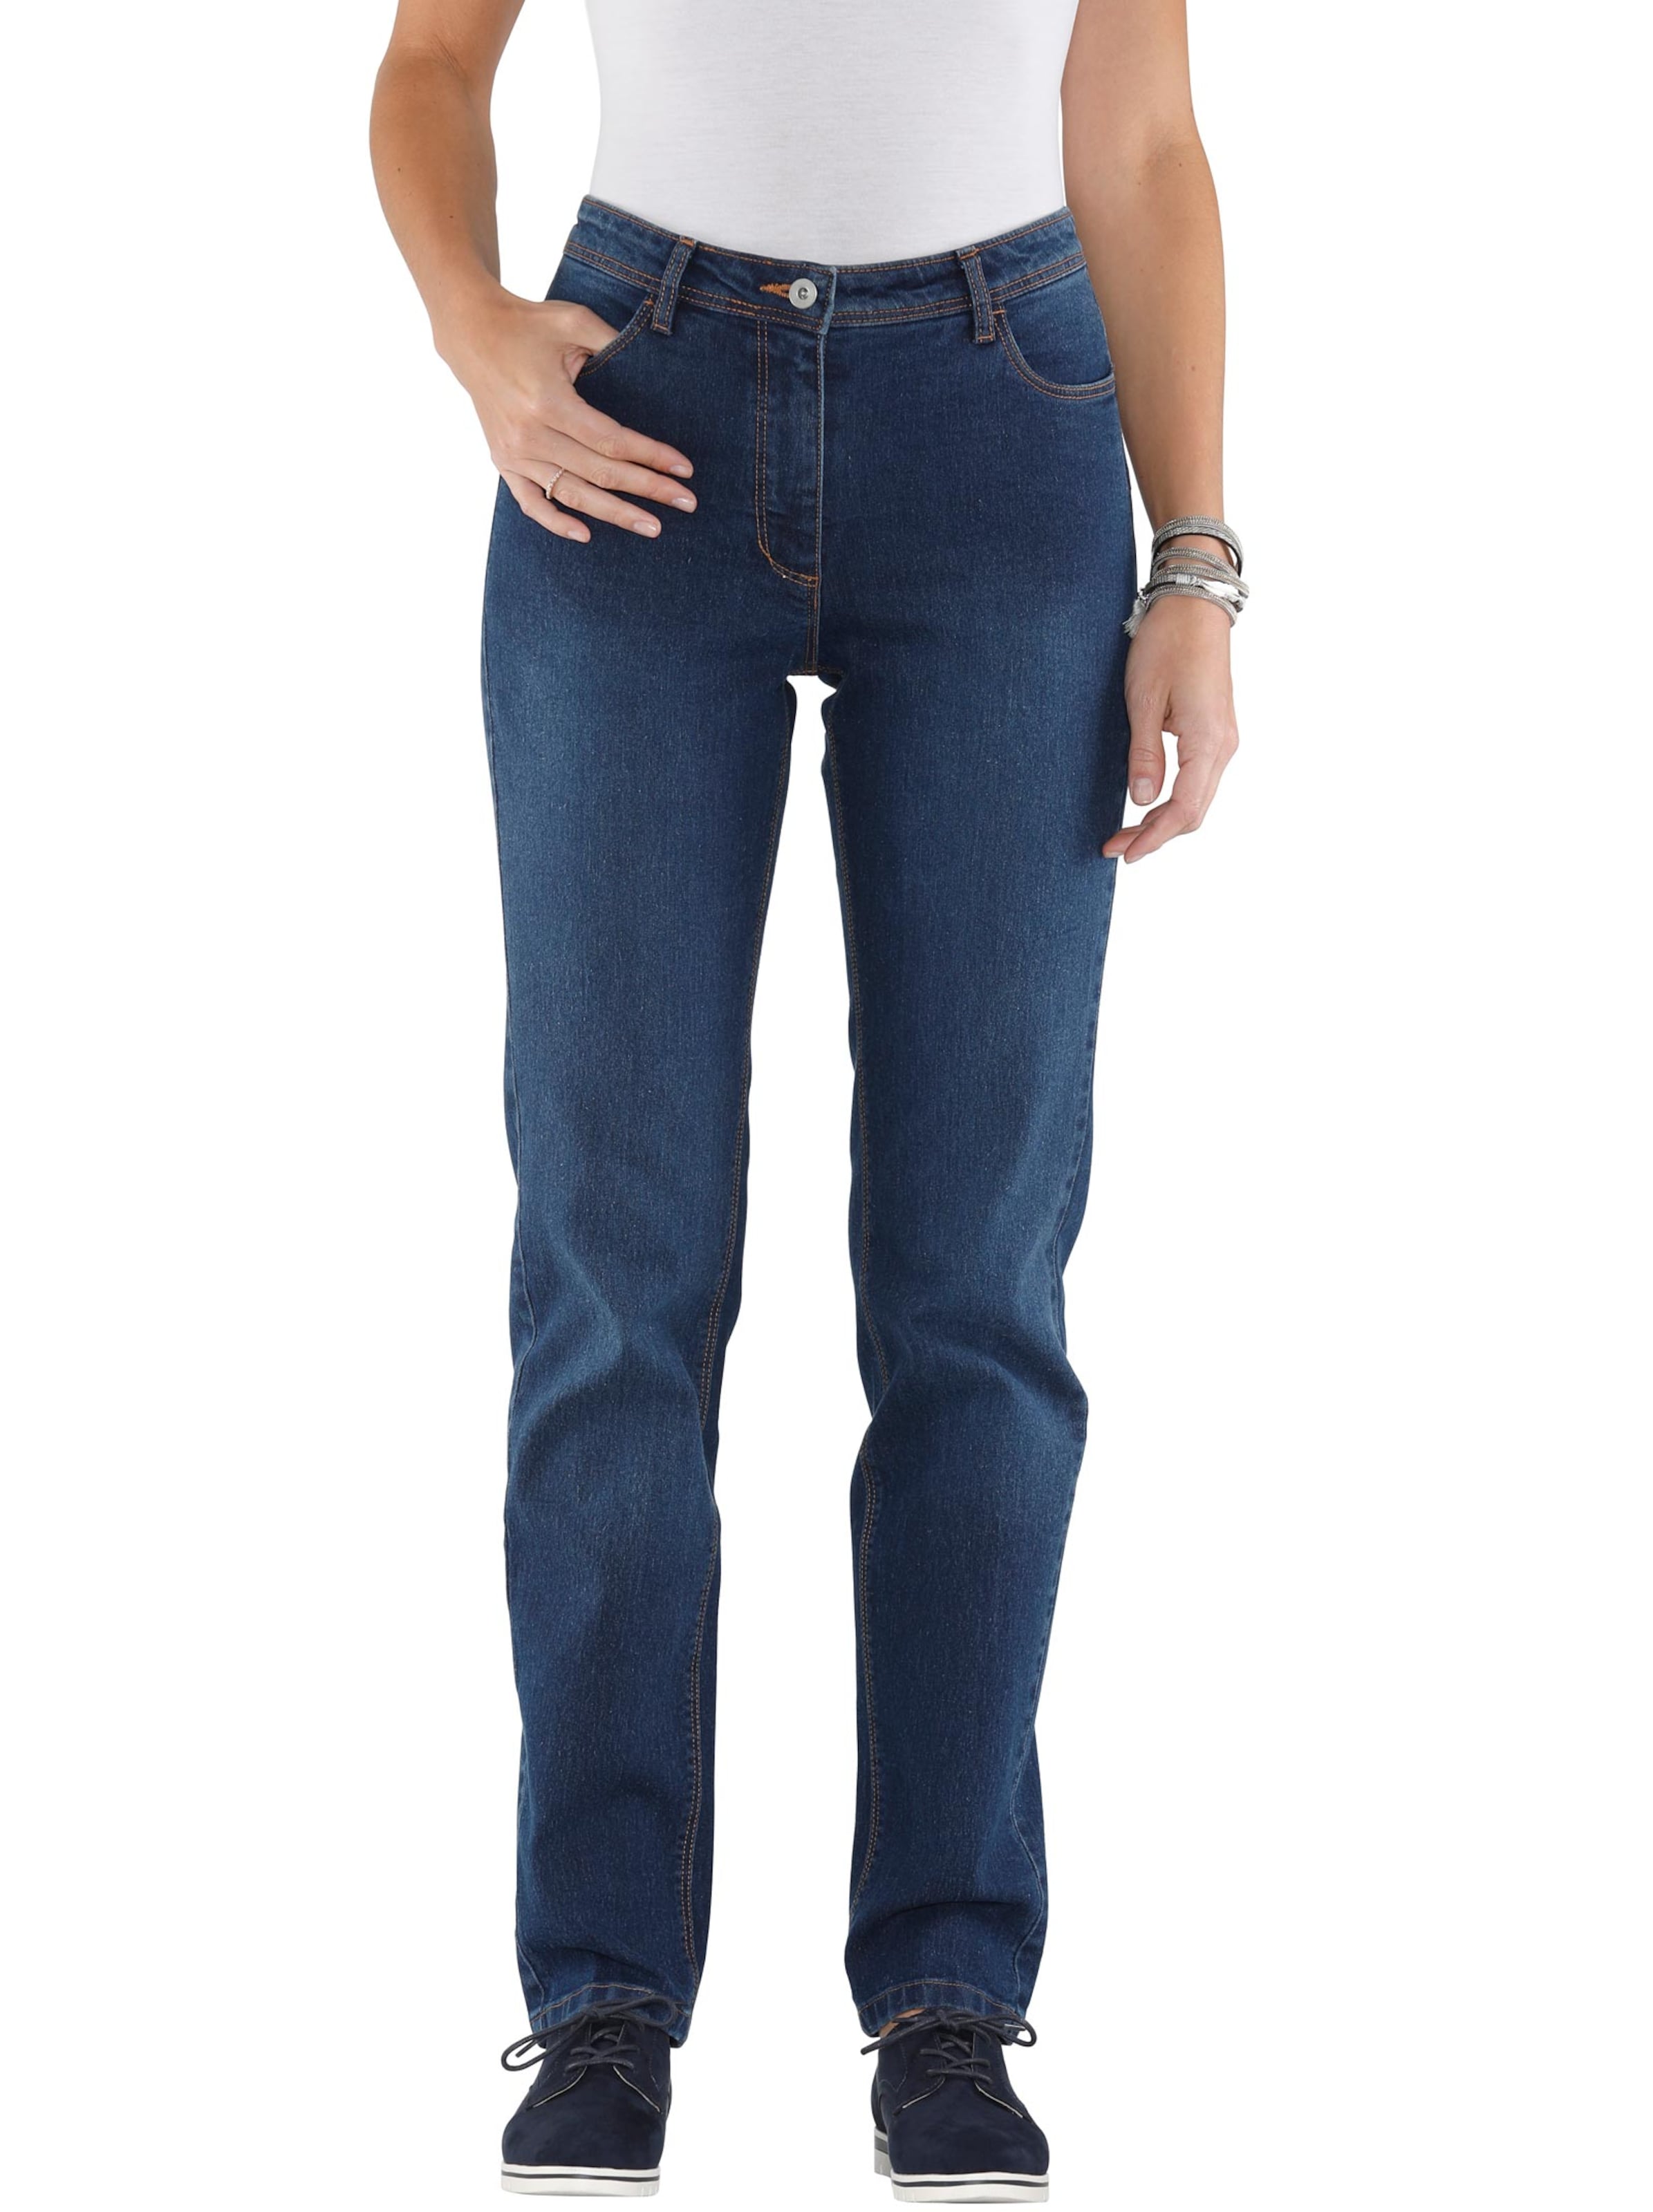 Jeans in blue-stonewashed | Your Look... for less!